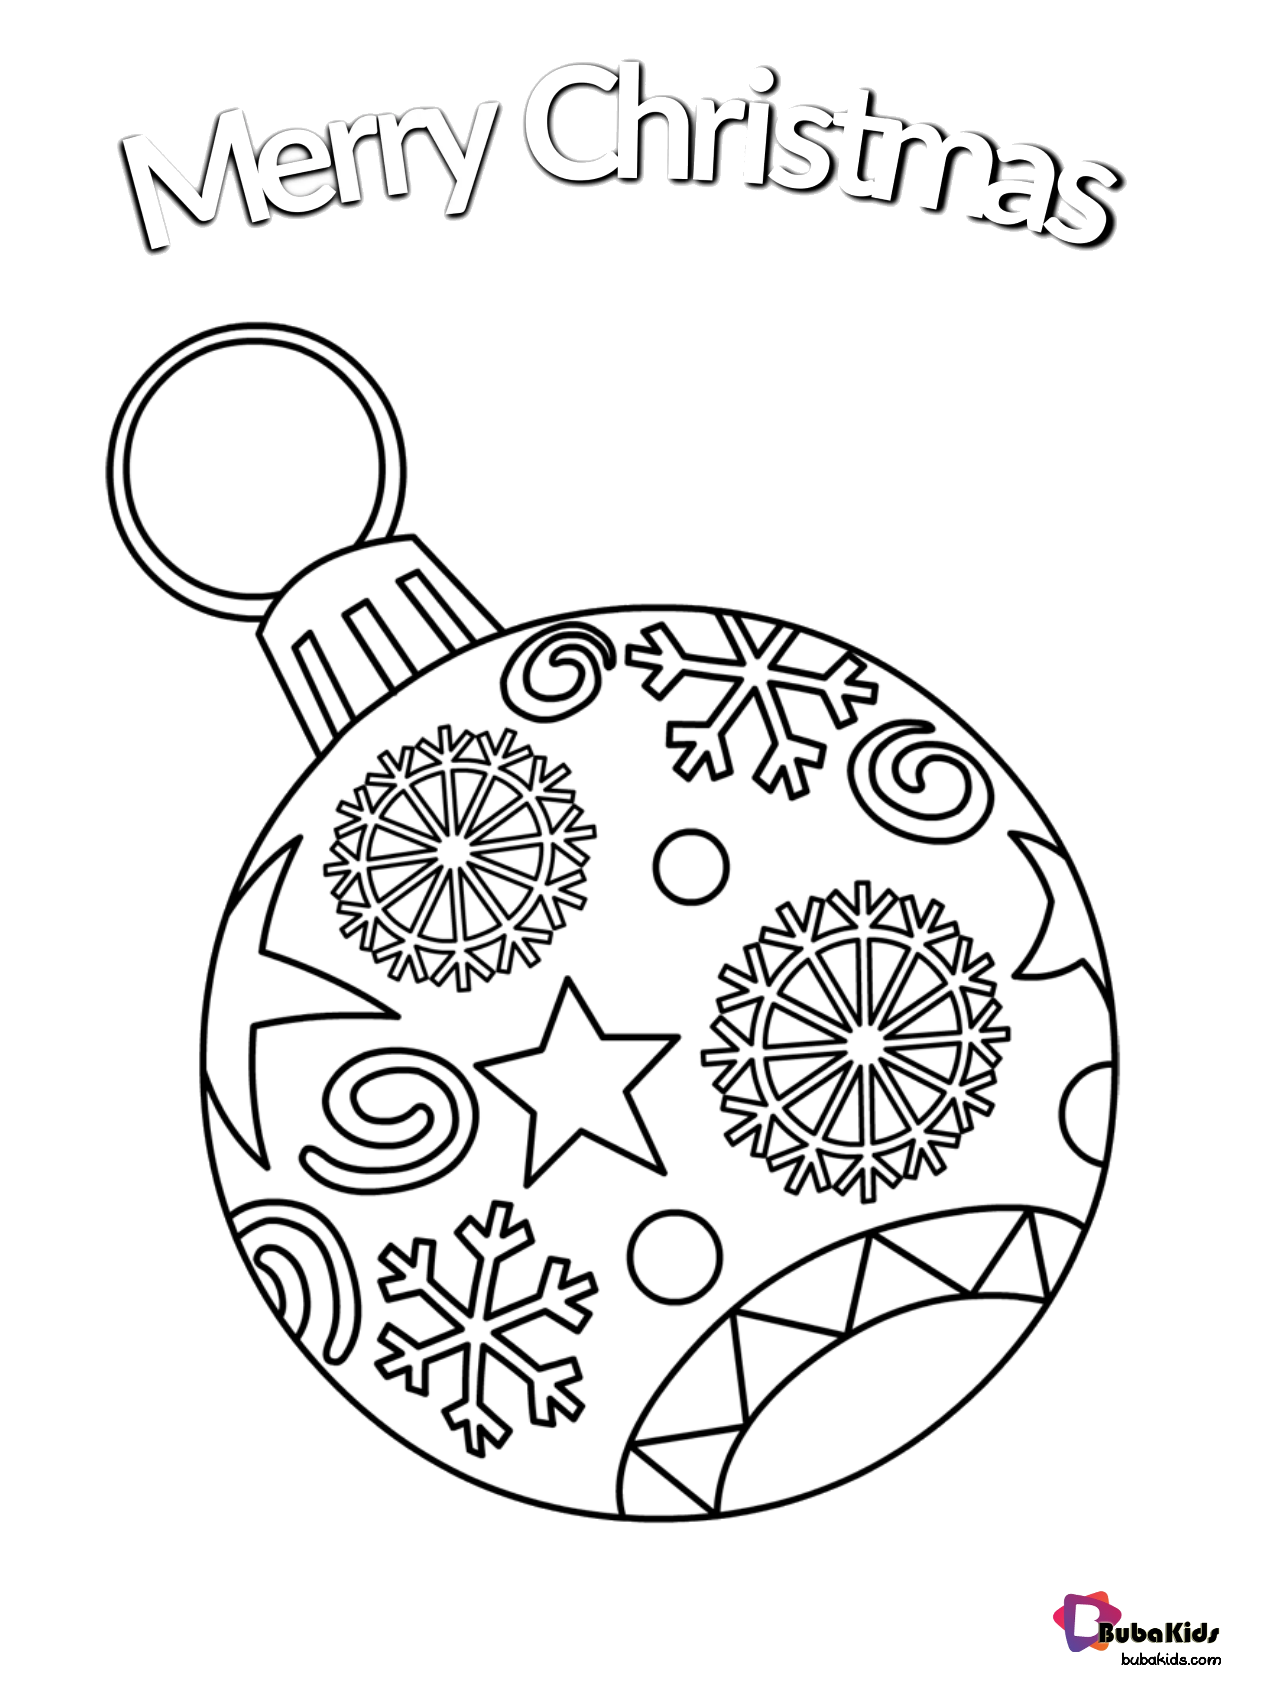 Christmas Tree Ornament coloring page.